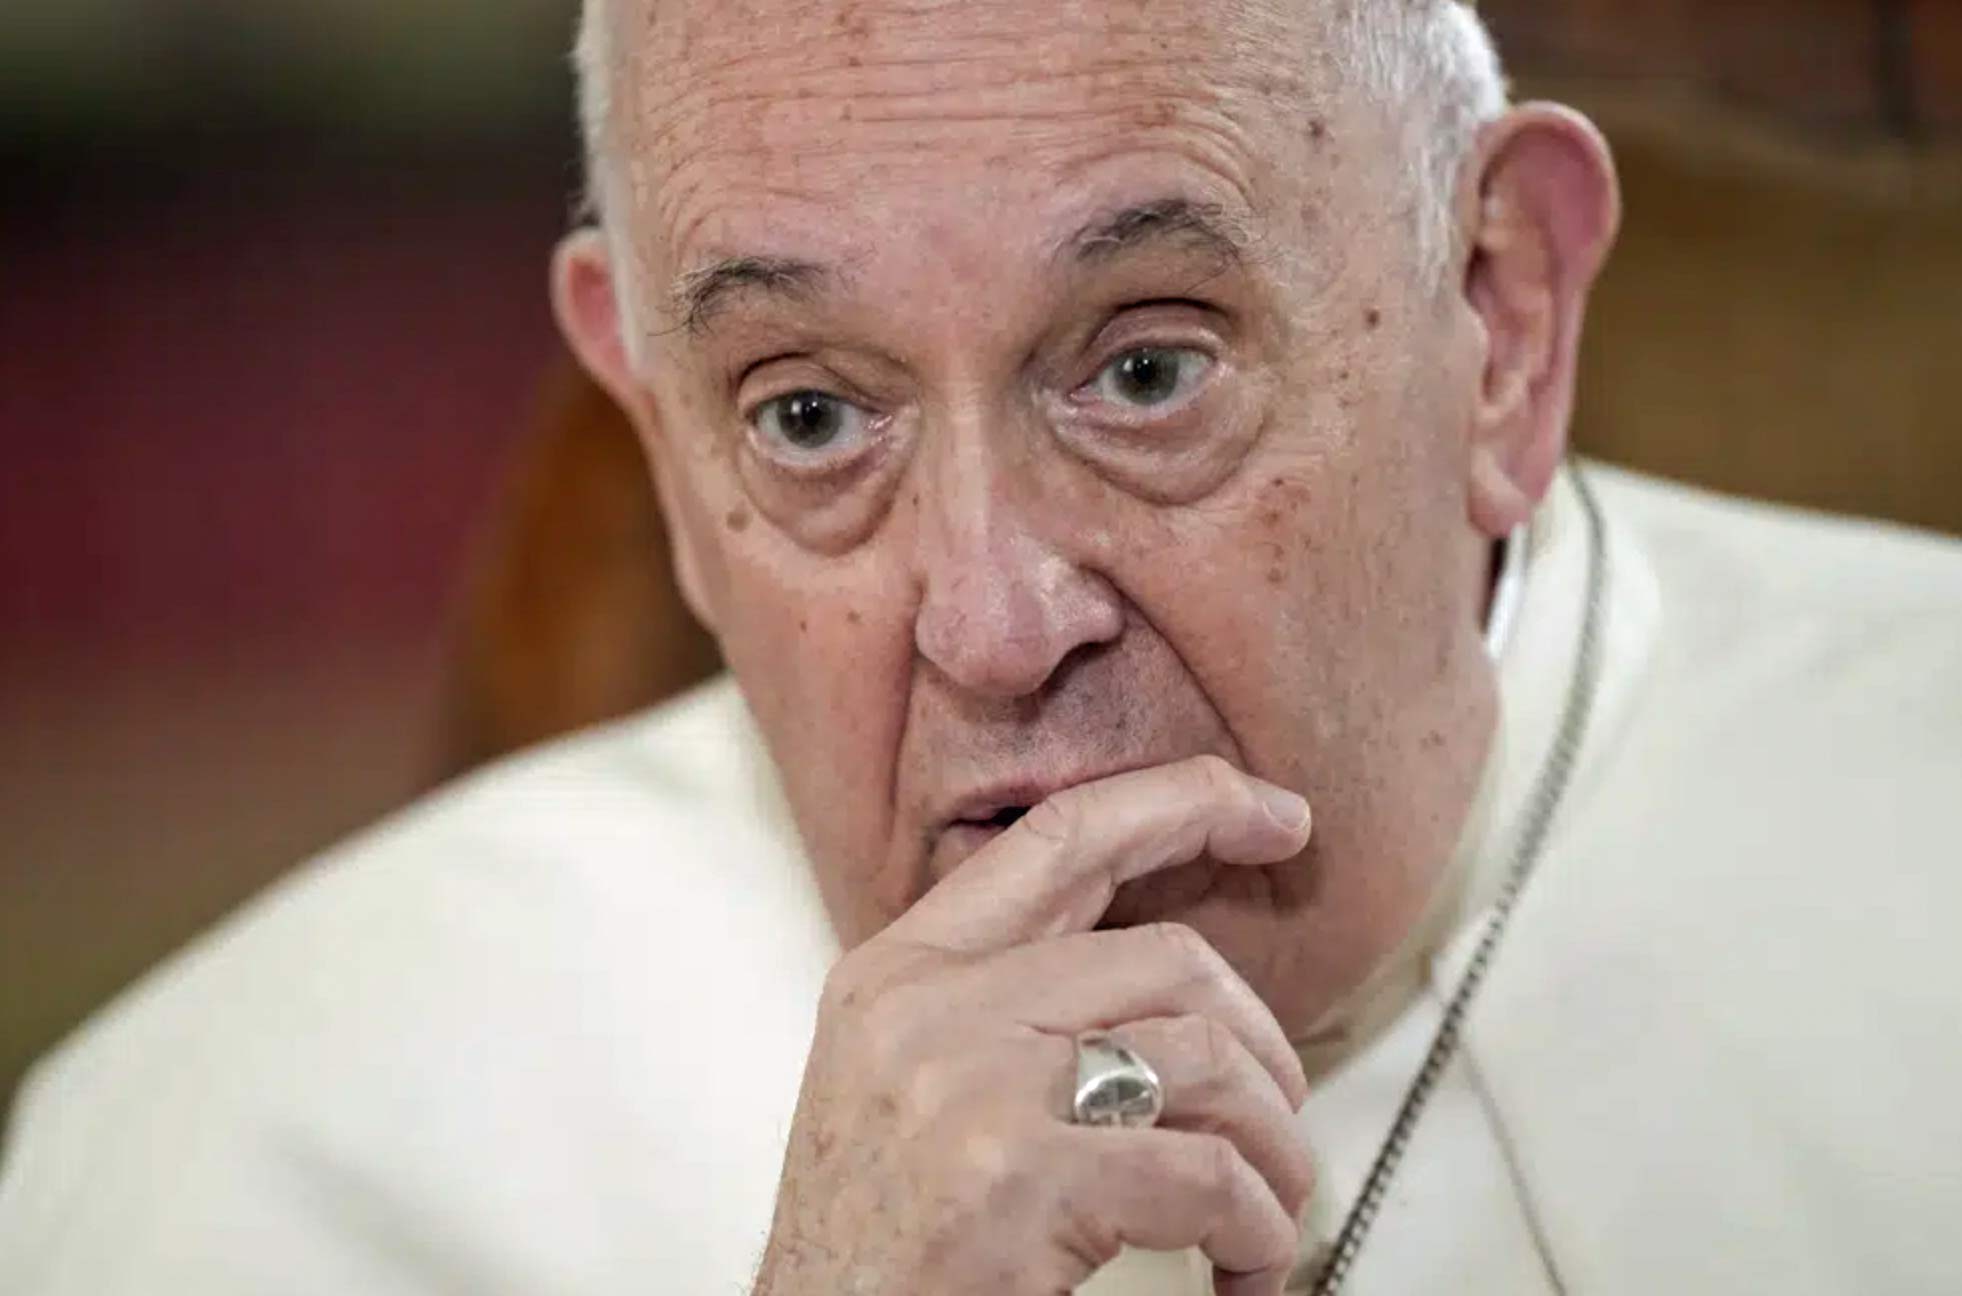 Pope Francis: "Persons with homosexual tendencies are children of God. God loves them. God accompanies them … condemning a person like this is a sin. Criminalising people with homosexual tendencies is an injustice.” (Andrew Medichini photo courtesy of AP)